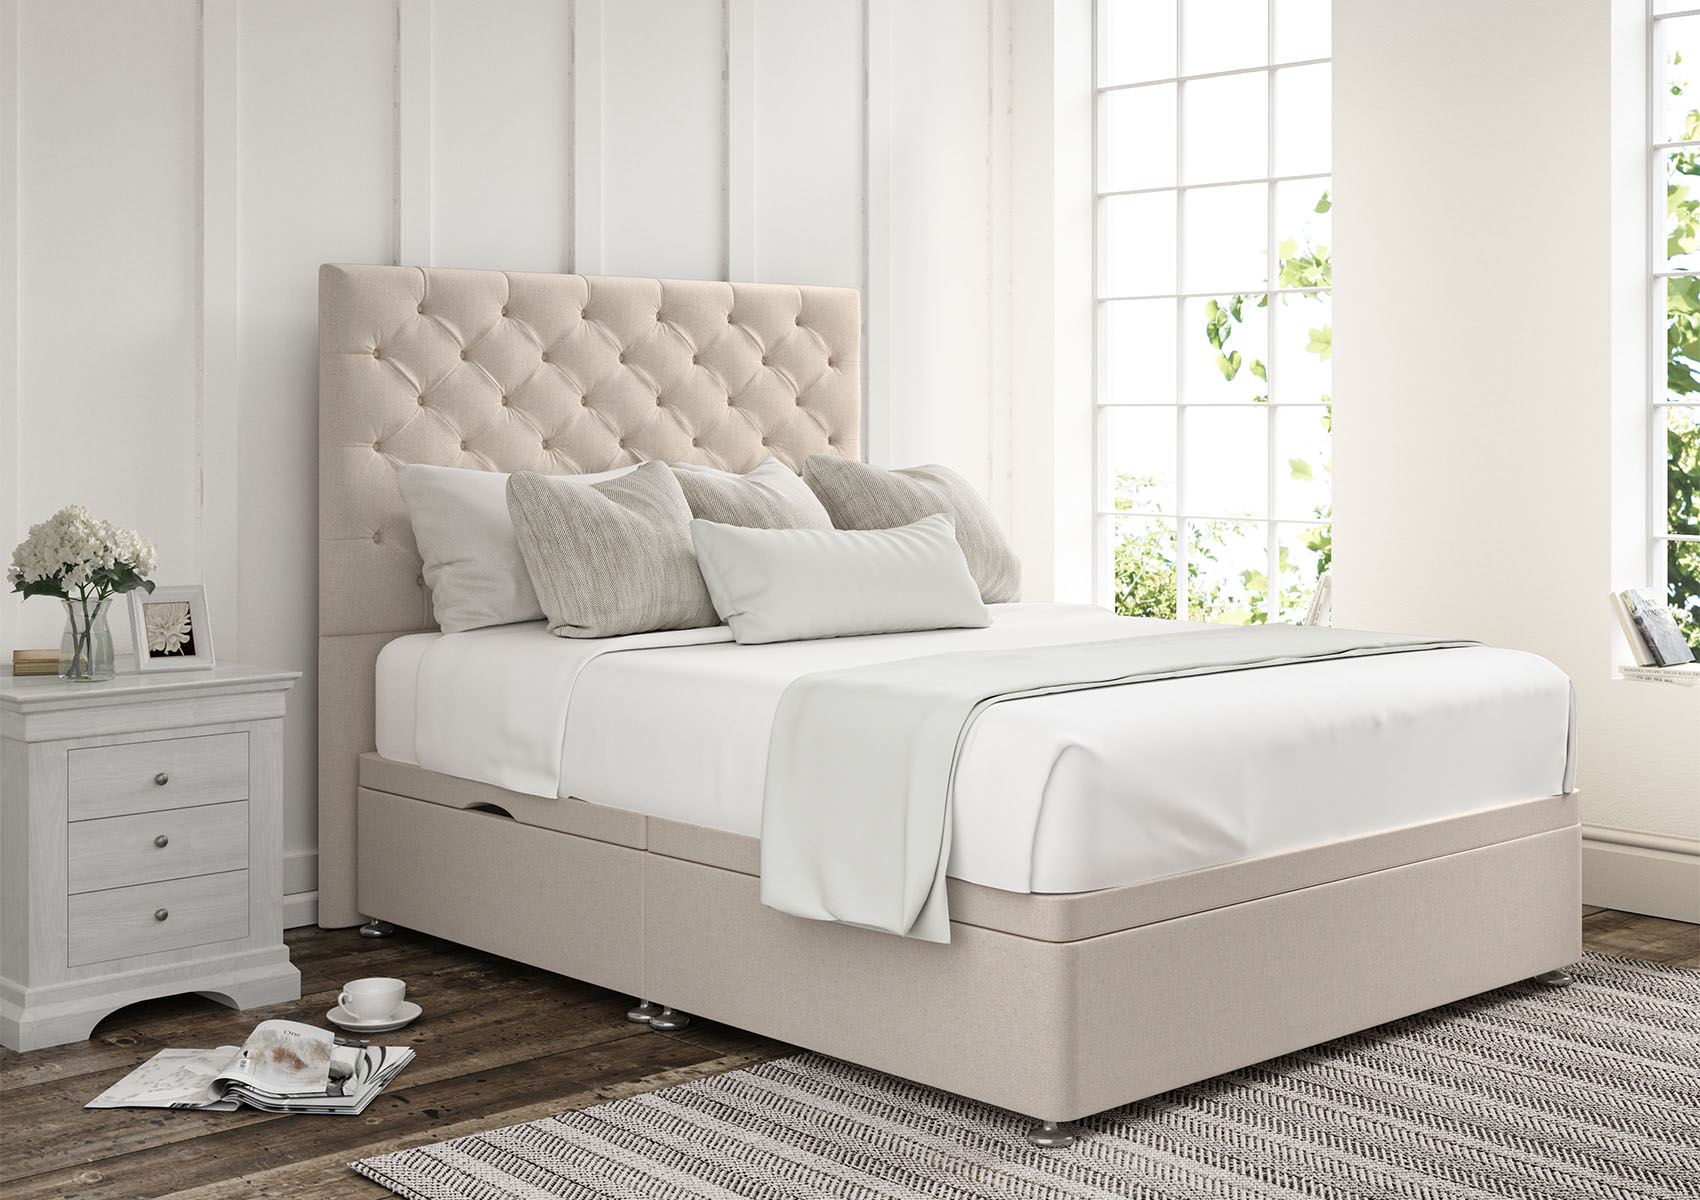 View Chesterfield Carina Parchment Upholstered Single Ottoman Bed Time4Sleep information